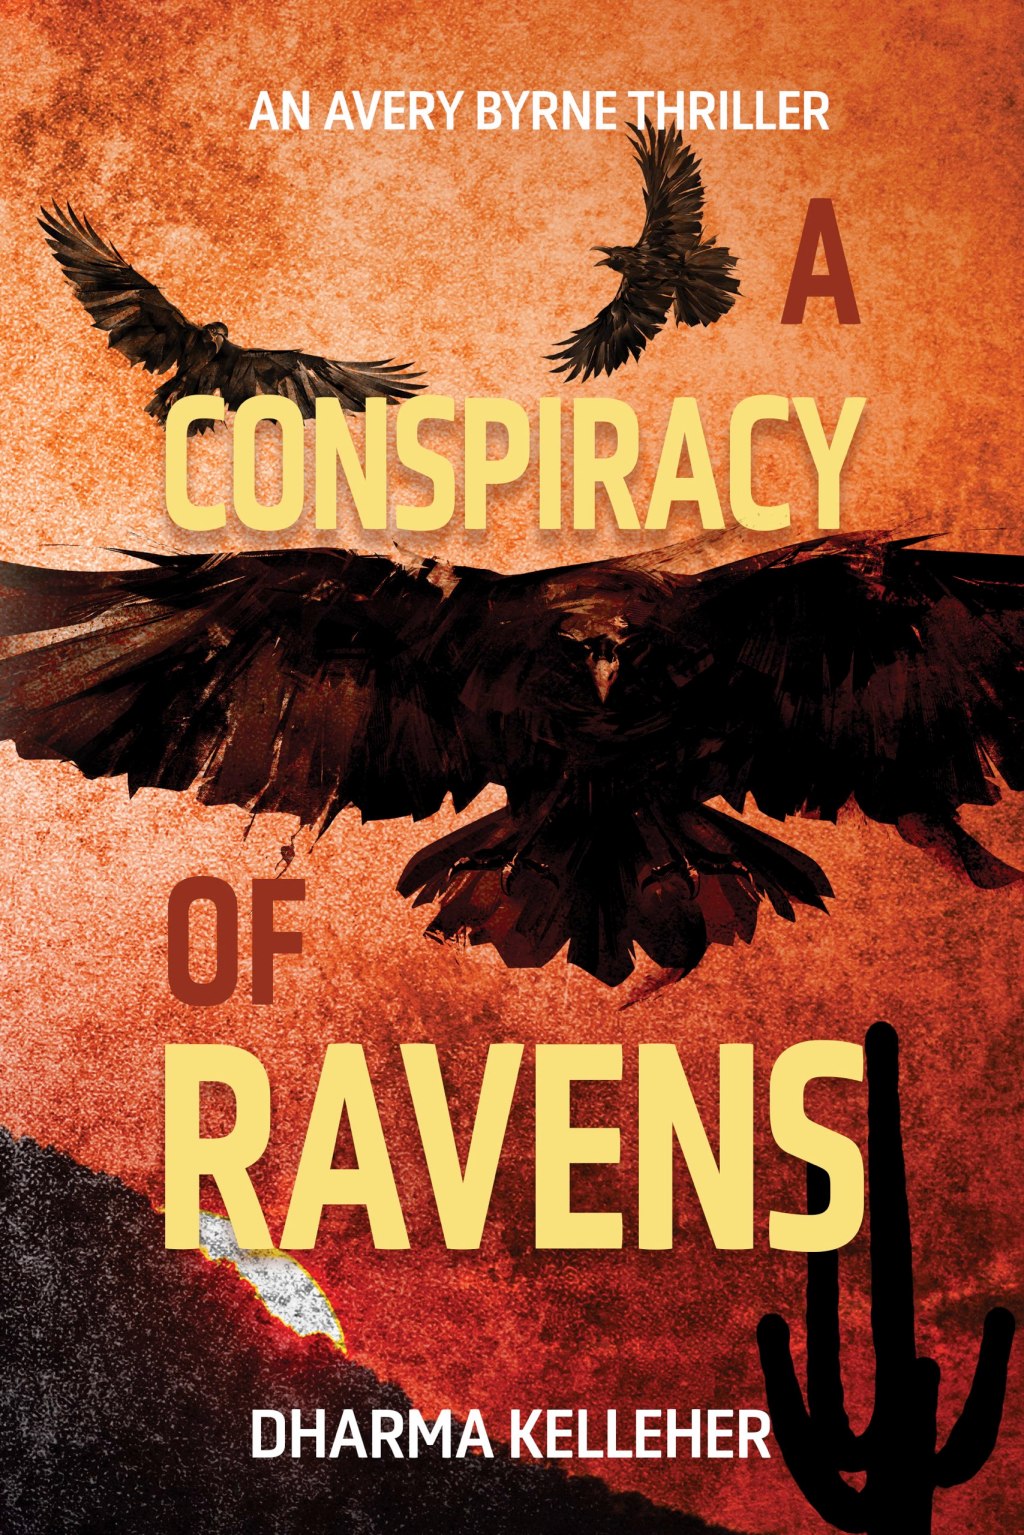 Book Review: A Conspiracy of Ravens by Dharma Kelleher (thriller)